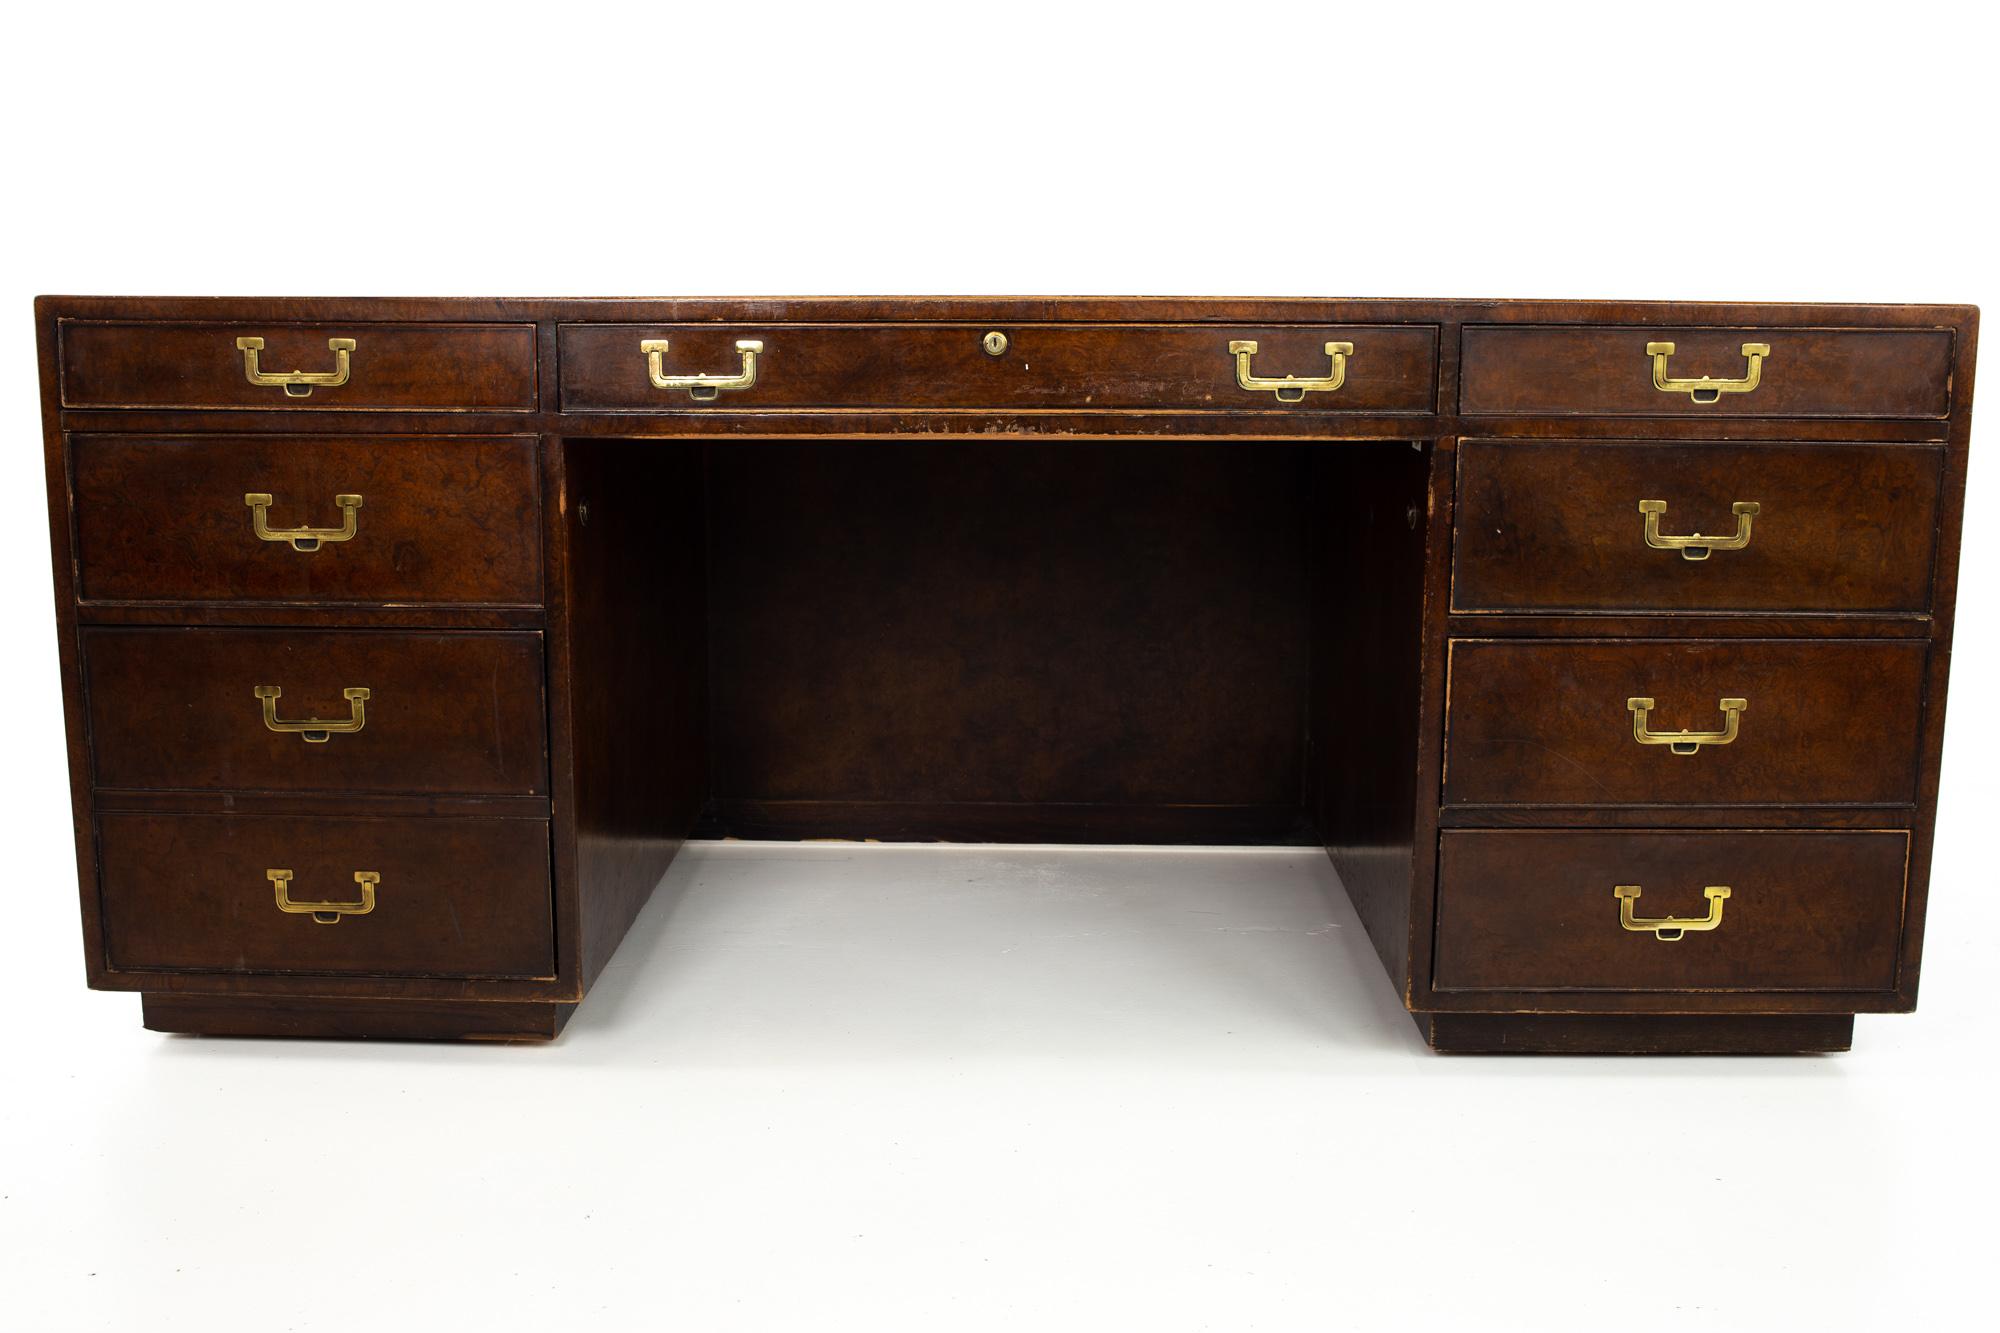 John Widdicomb Mid Century burlwood Campaign executive desk.
Desk measures: 72 wide x 36 deep x 30 inches high

All pieces of furniture can be had in what we call restored vintage condition. This means the piece is restored upon purchase so it’s